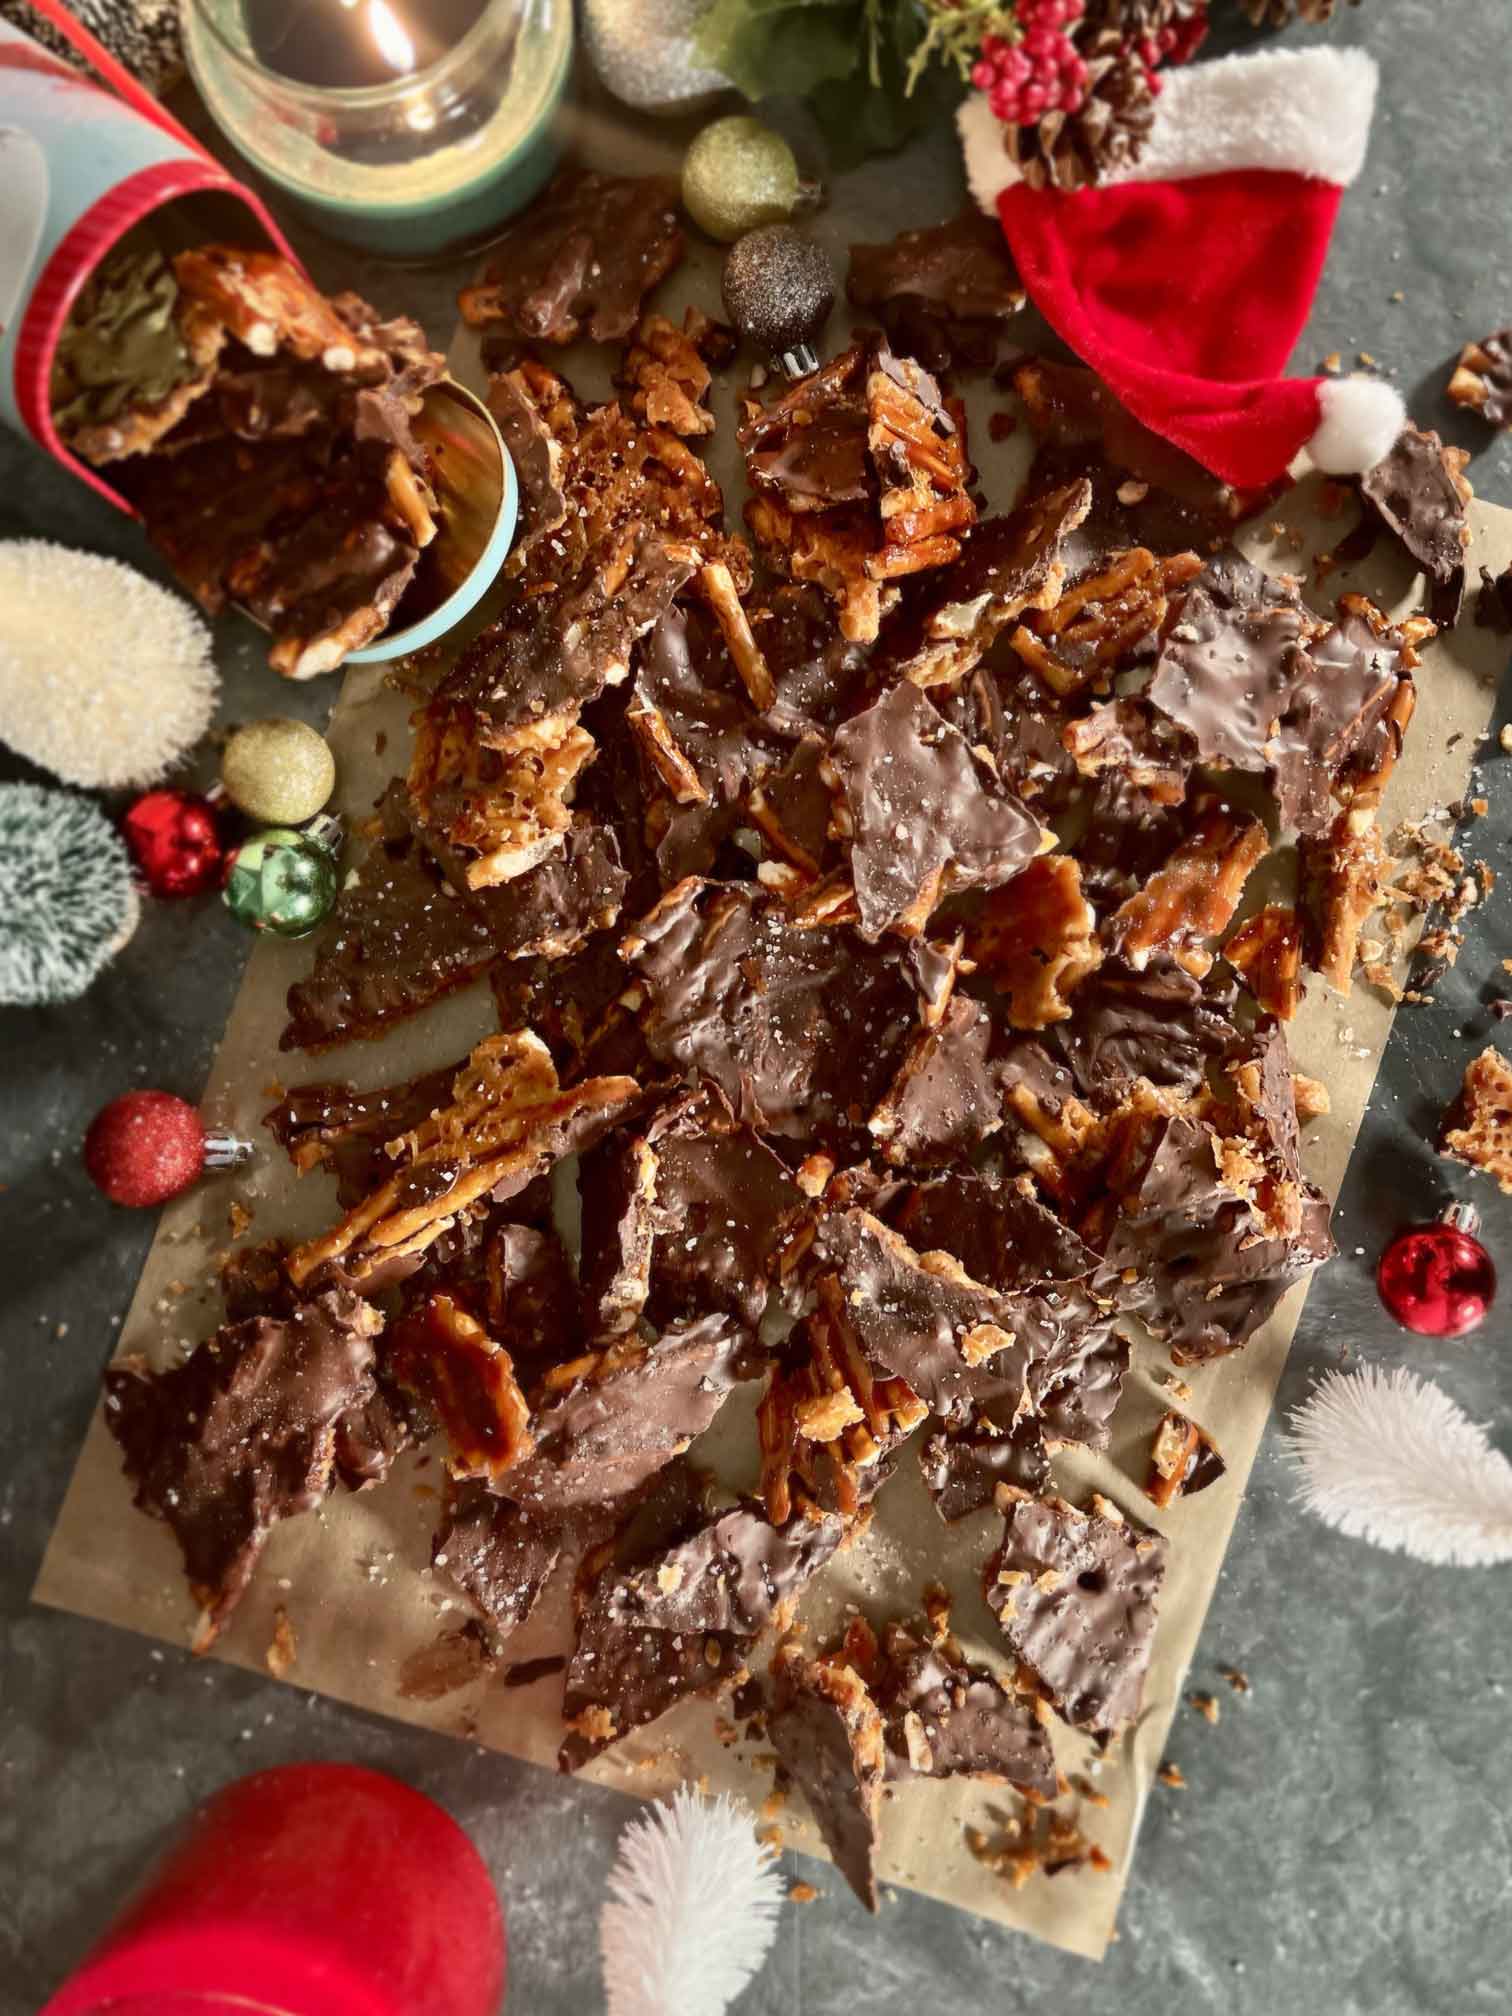 Salted Pretzel Christmas Crack arranged on stone counter with Christmas Decor